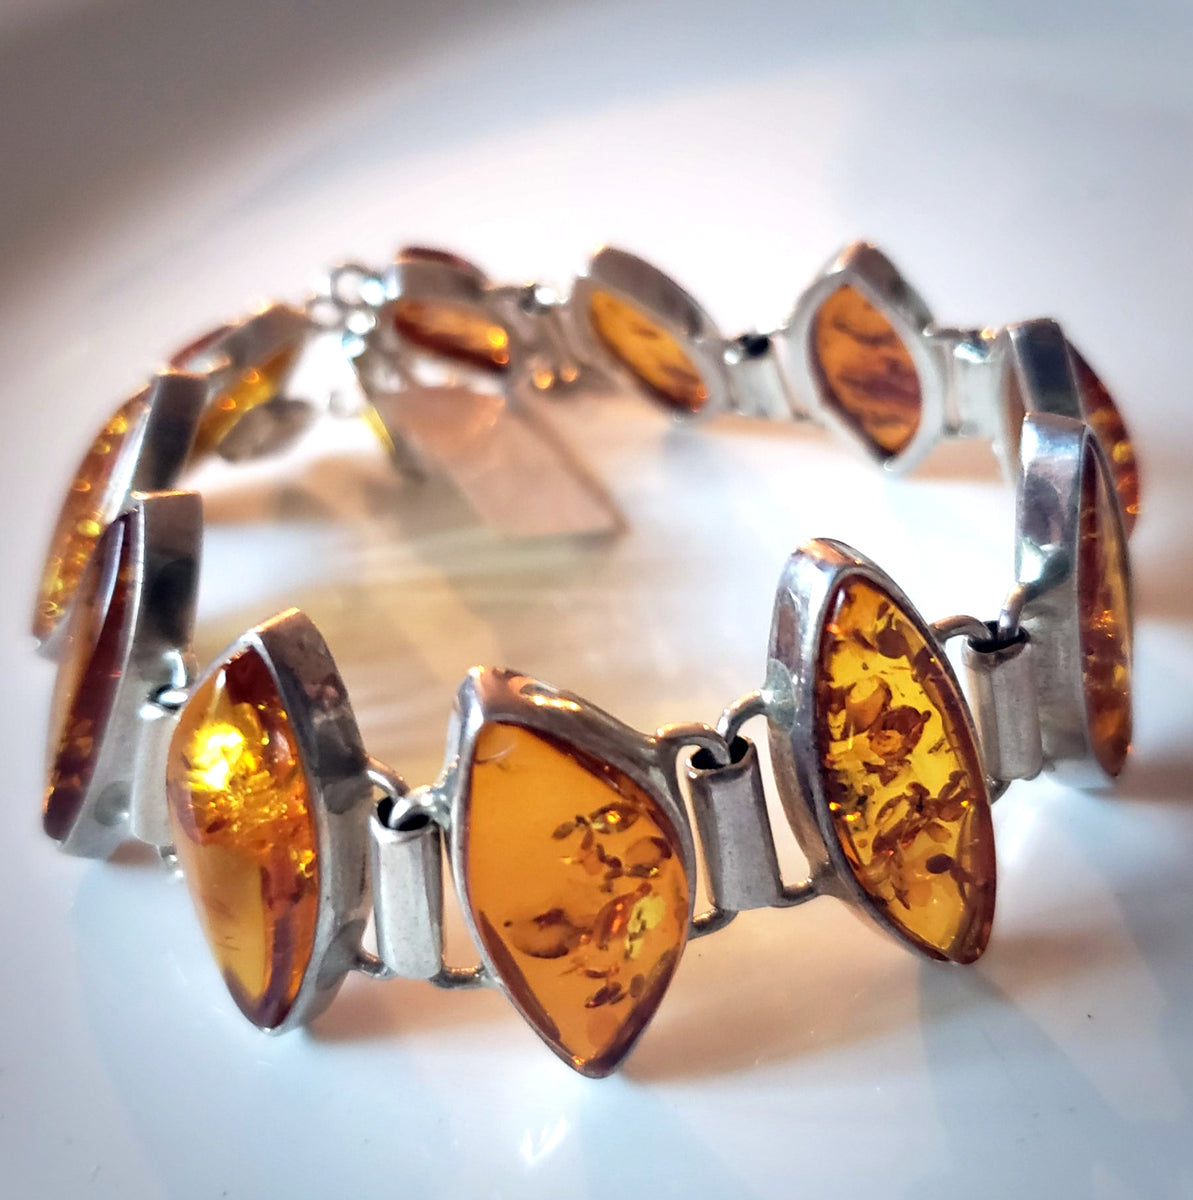 Details about   Cute Baltic Amber Bracelet with Silver 925